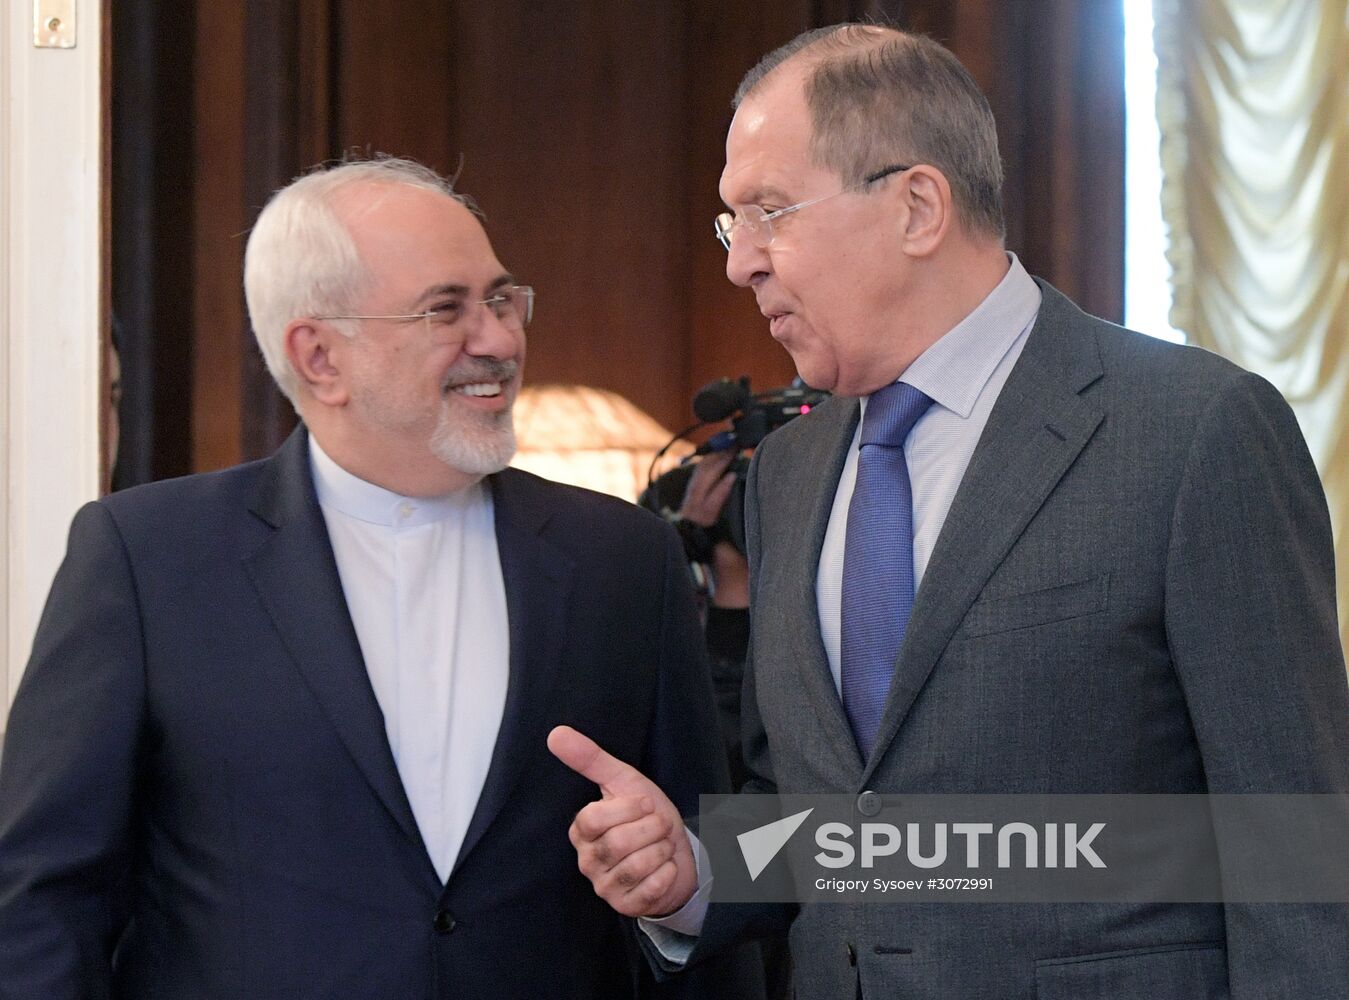 Meeting of the Foreign Ministers of Russia, Iran and Syria